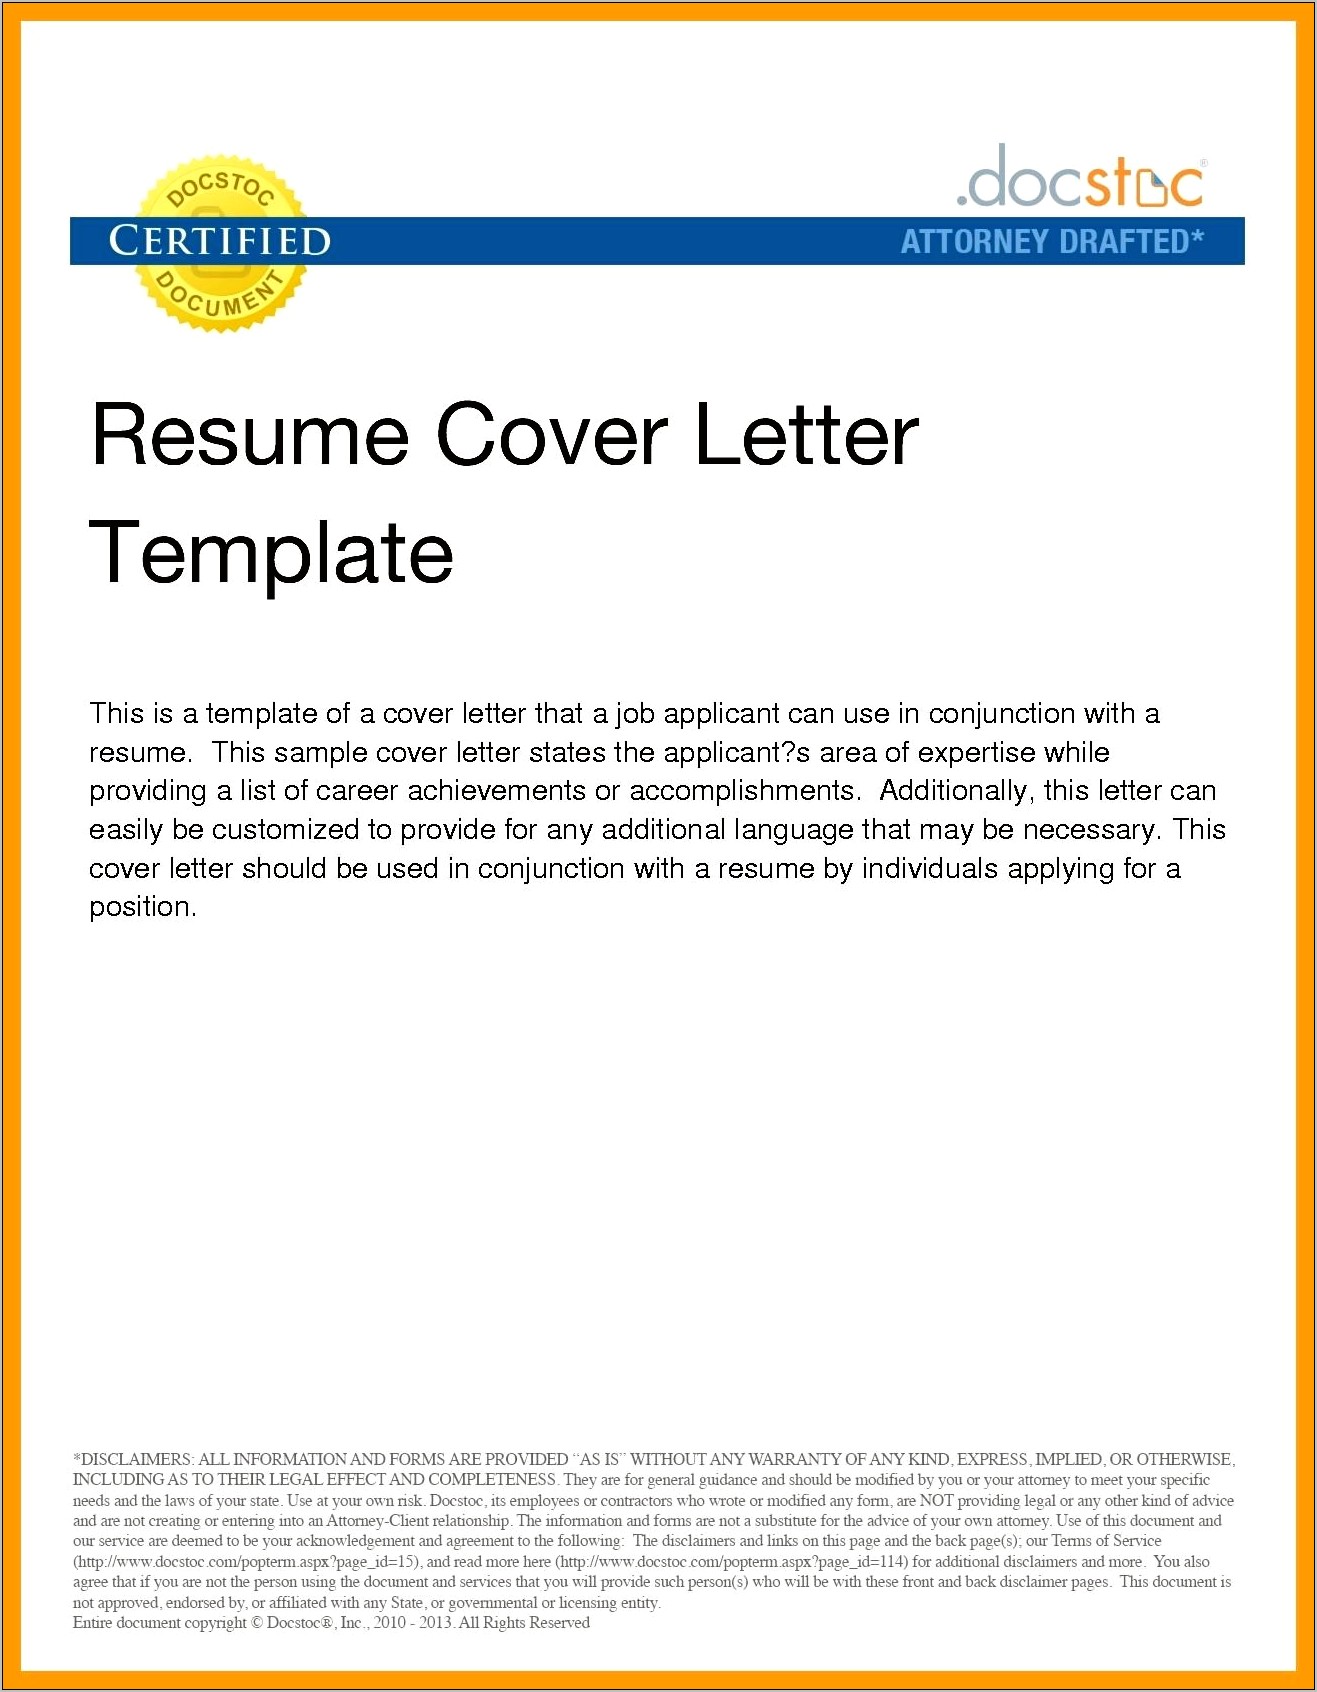 Sending A Email With Resume And Cover Letter